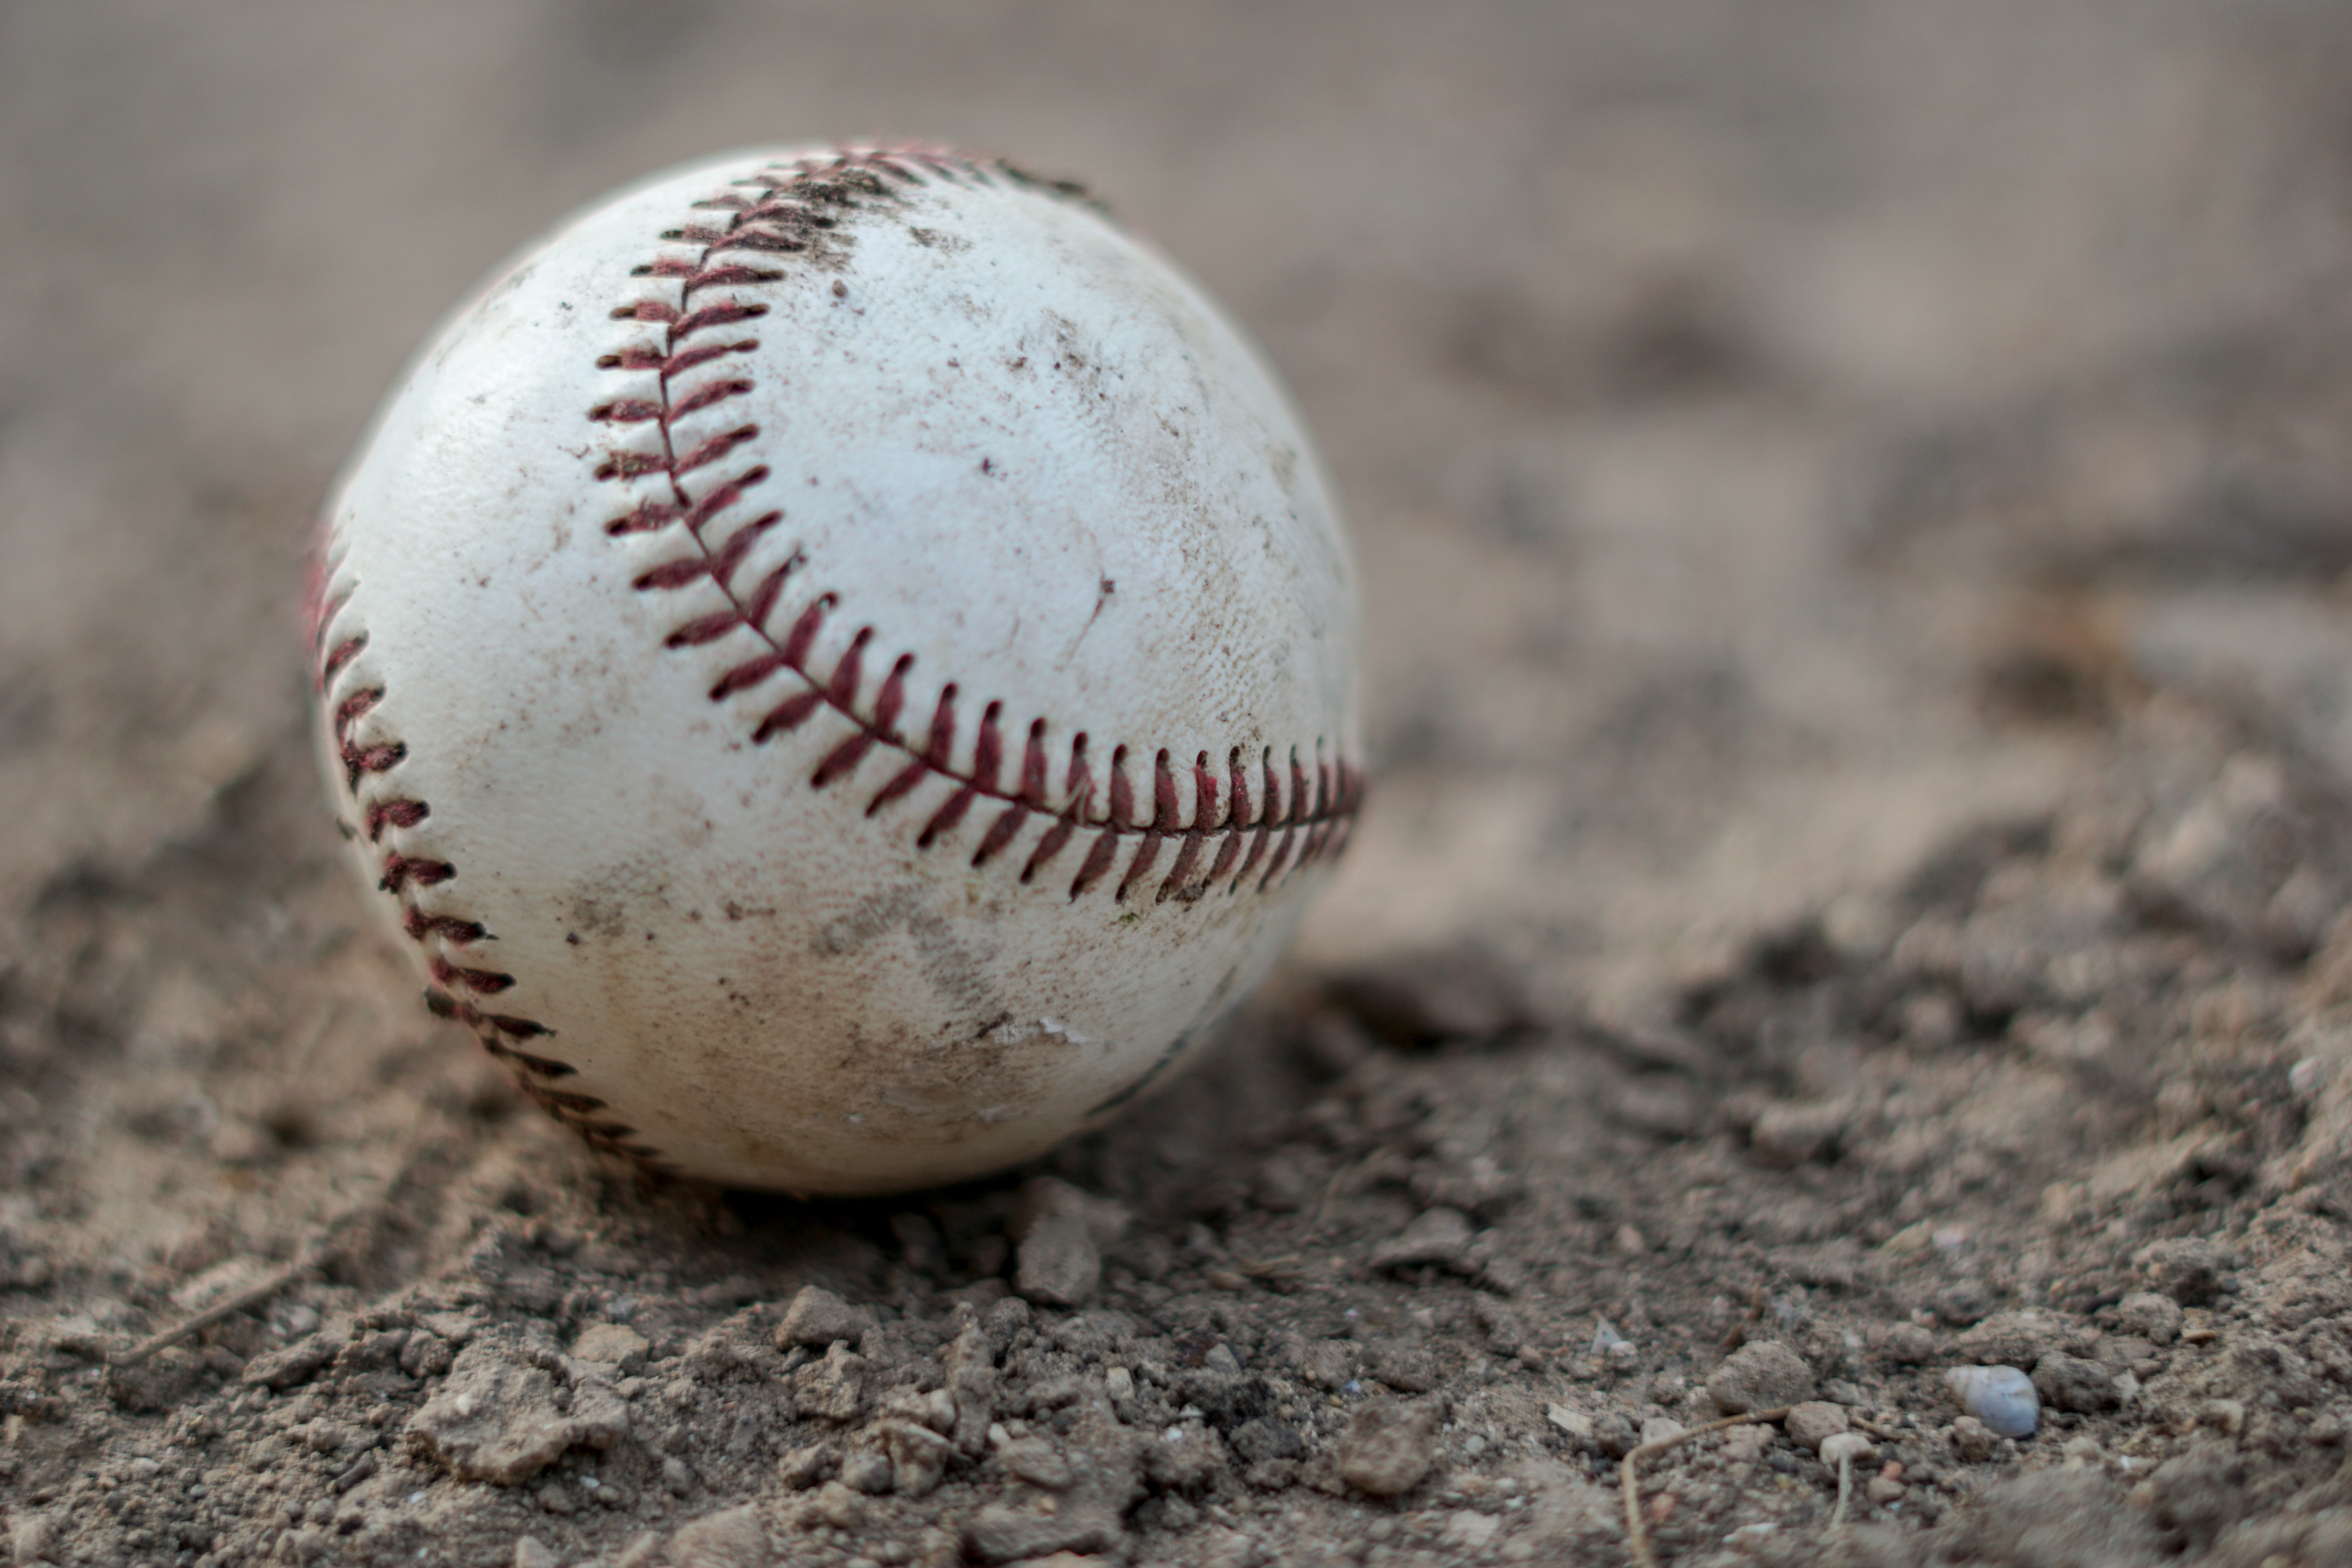 A baseball in the mud